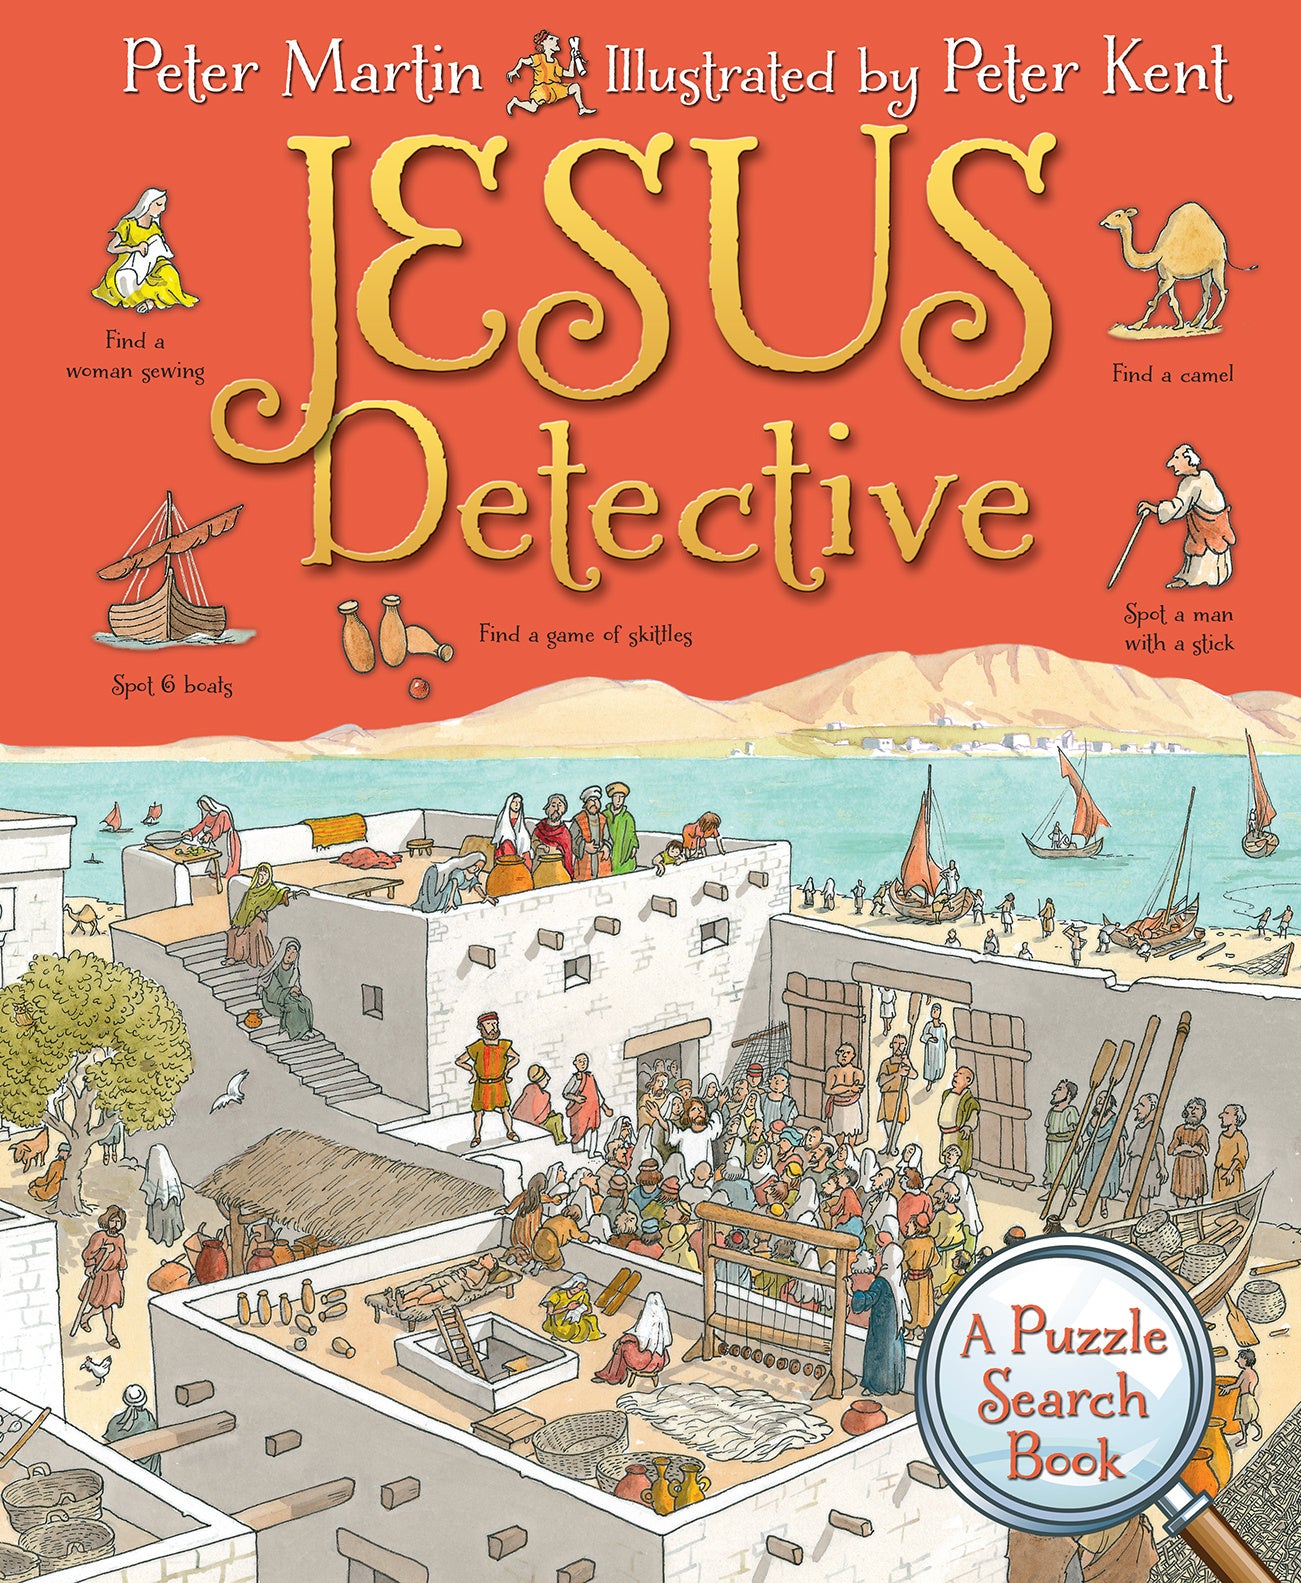 Image of Jesus Detective other